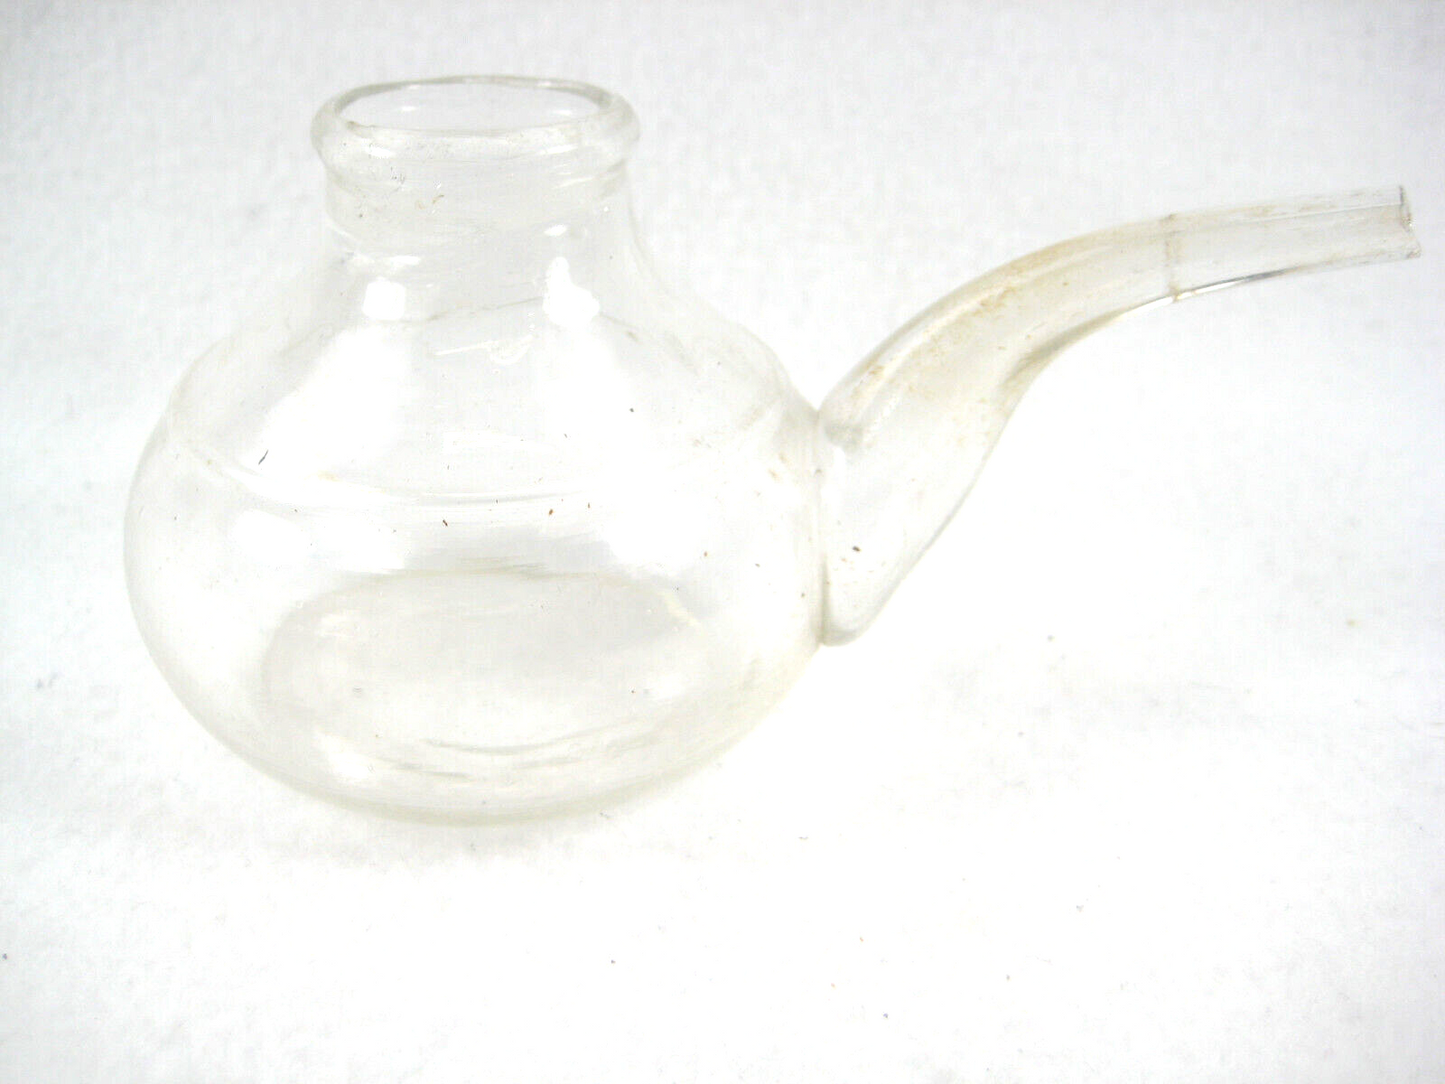 Antique Japanese Small Glass Blown Water Pour Decanter For Calligraphy 5" X 2.5"